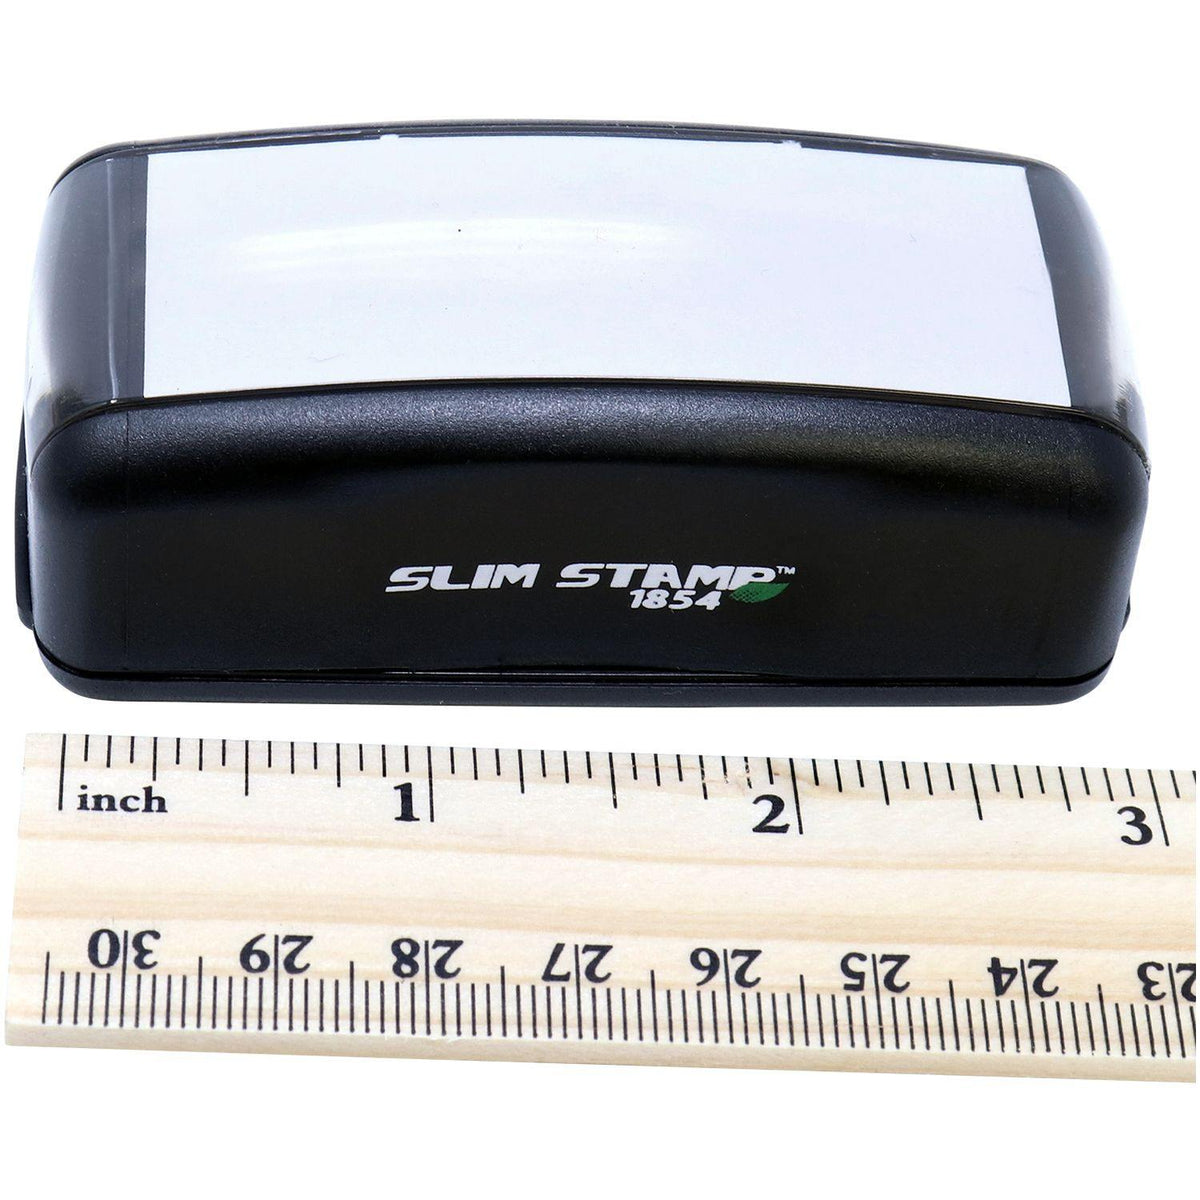 Measurement Large Pre-Inked Expreso Stamp with Ruler